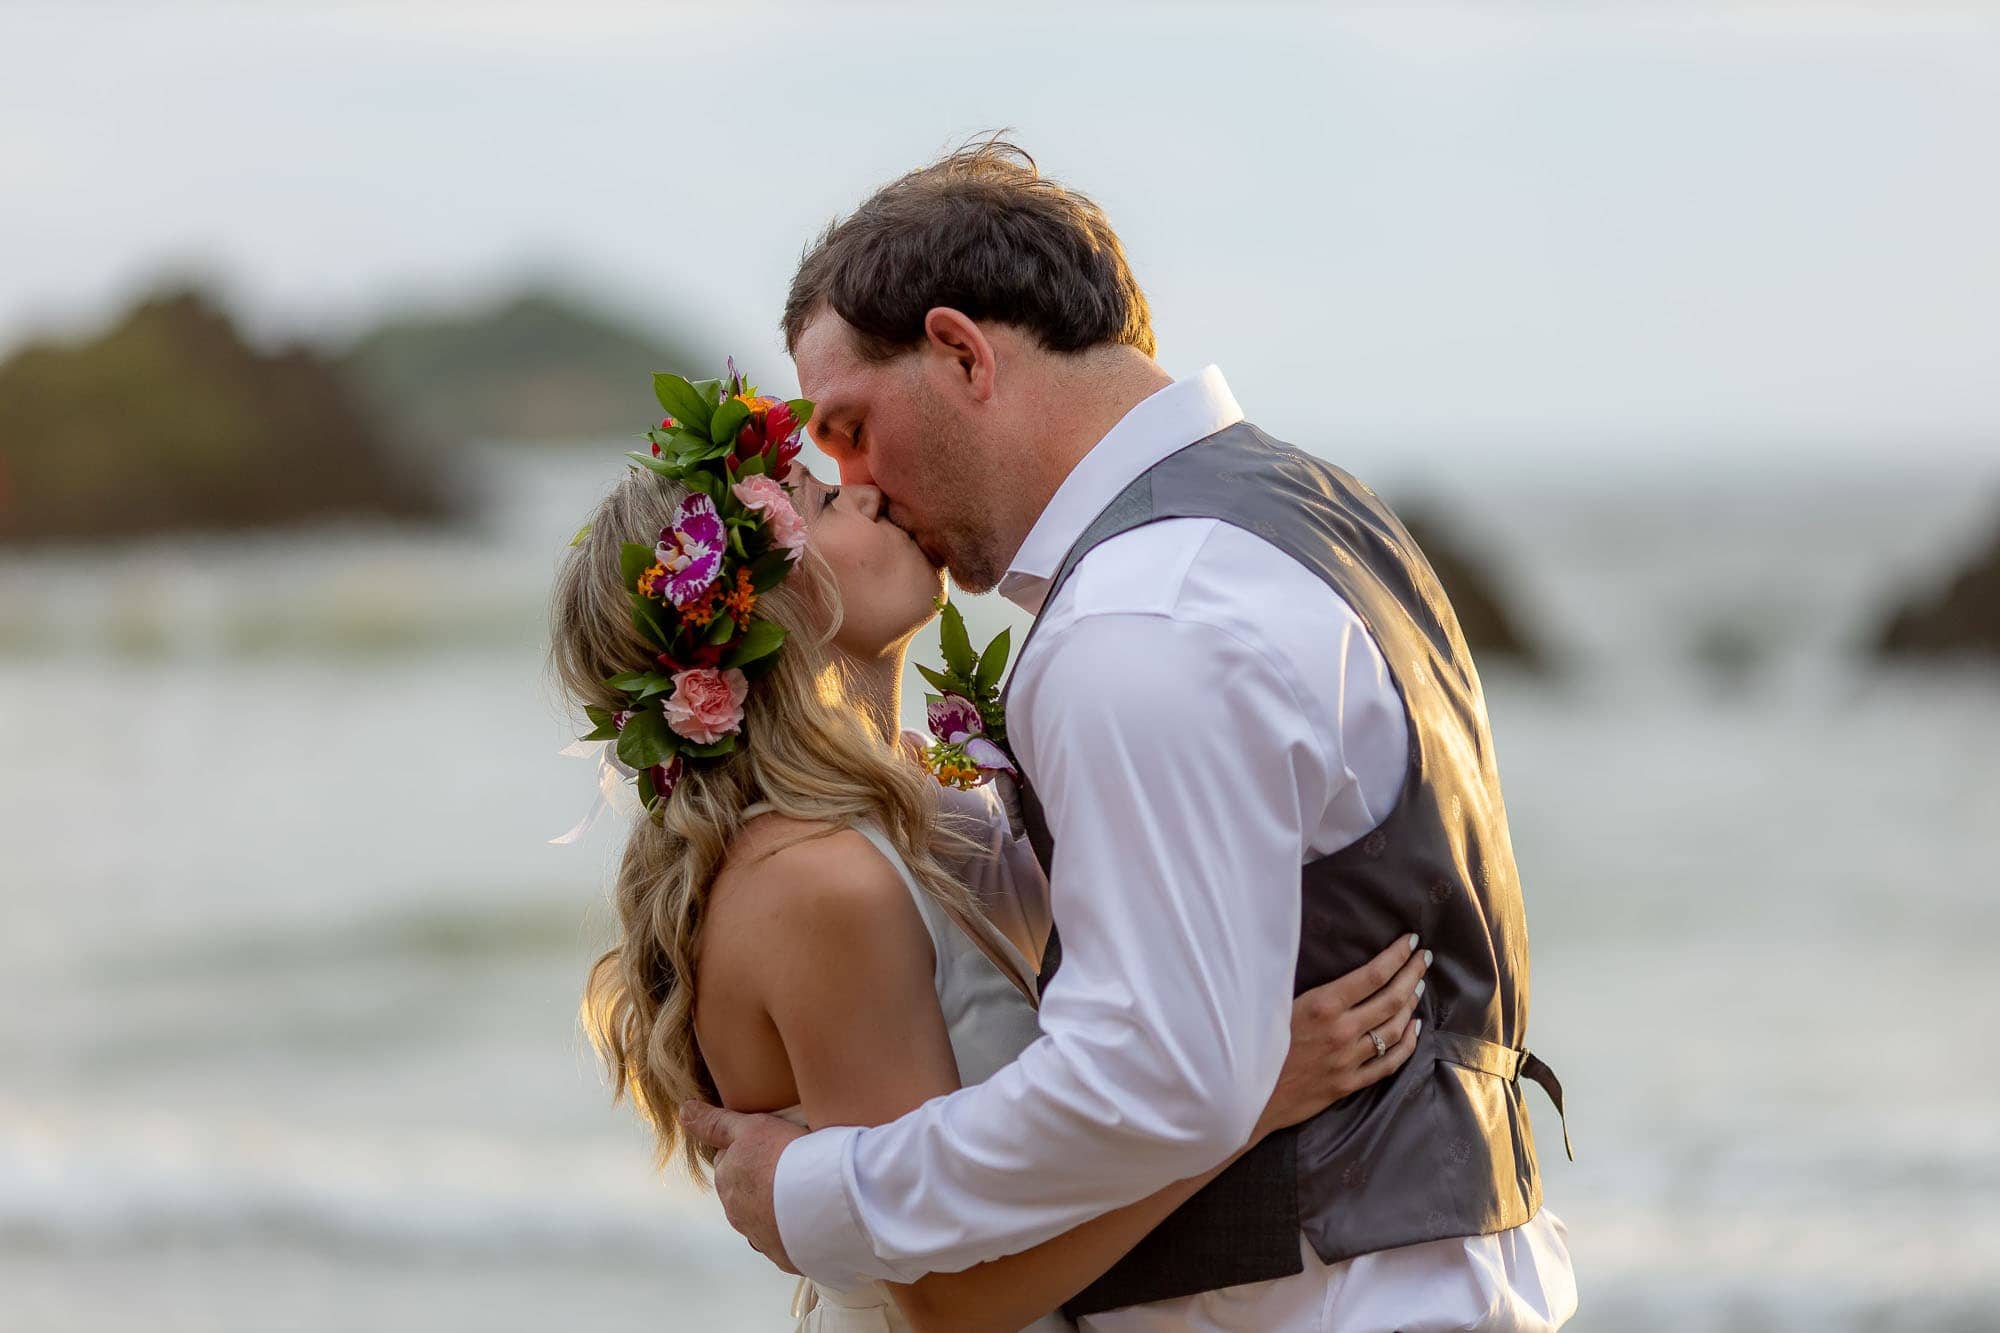 the bride and groom share their first kiss as husband and wife